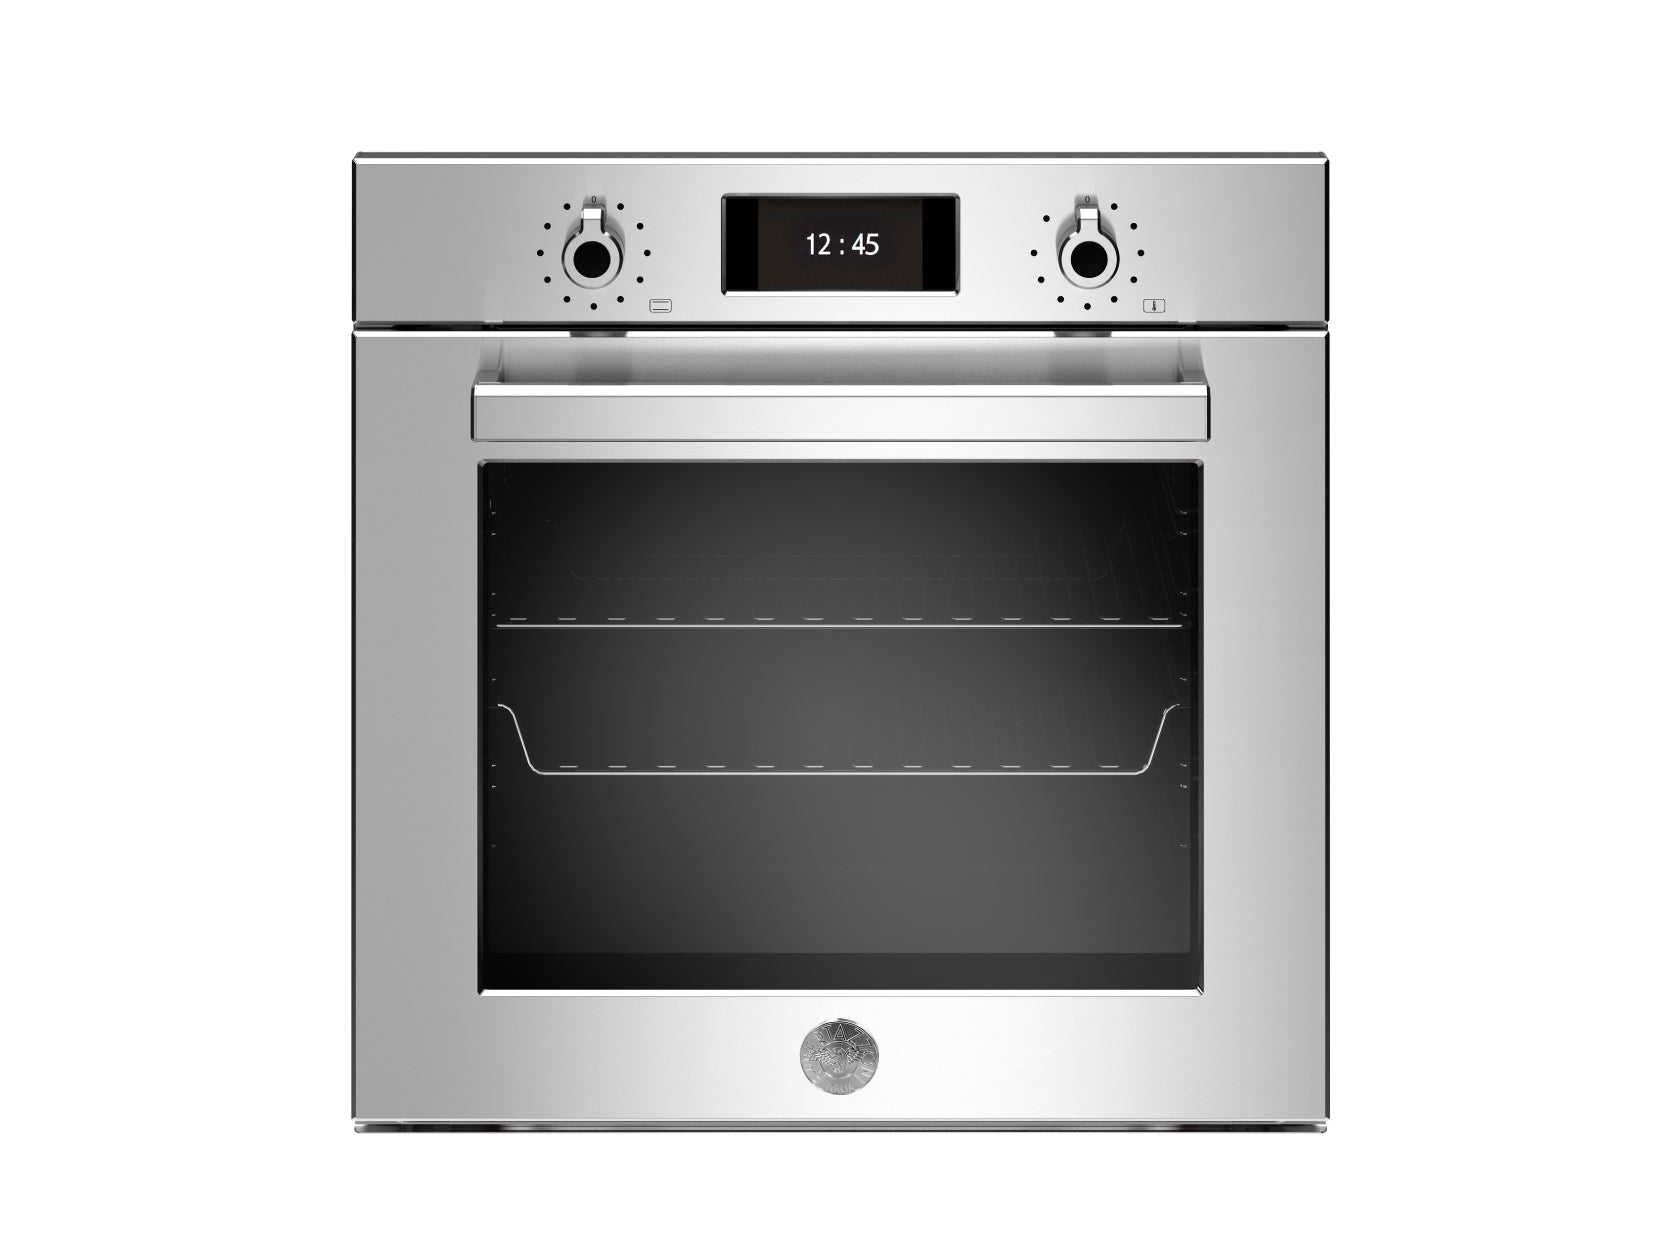 Bertazzoni F6011PROVPT/23 Professional Series 60cm Total Steam Electric Pyro Built-in Oven